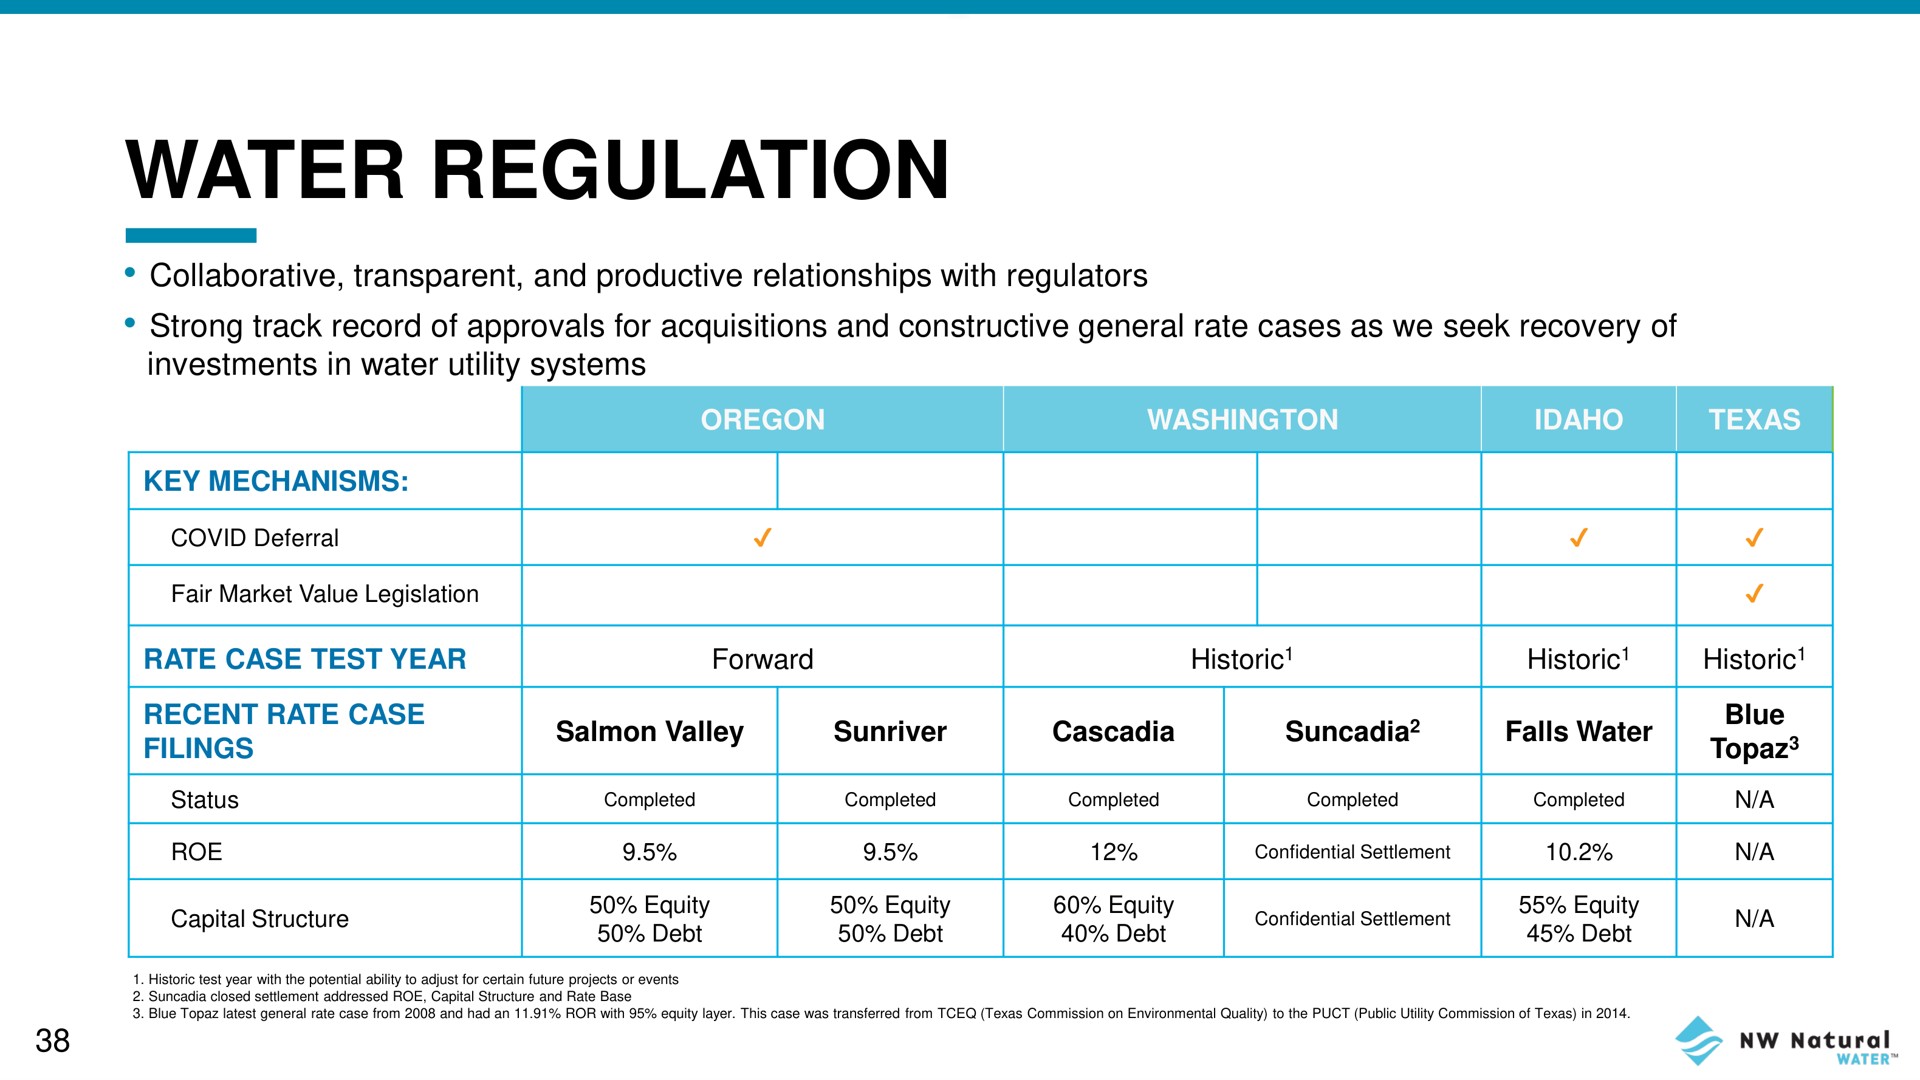 water regulation | NW Natural Holdings